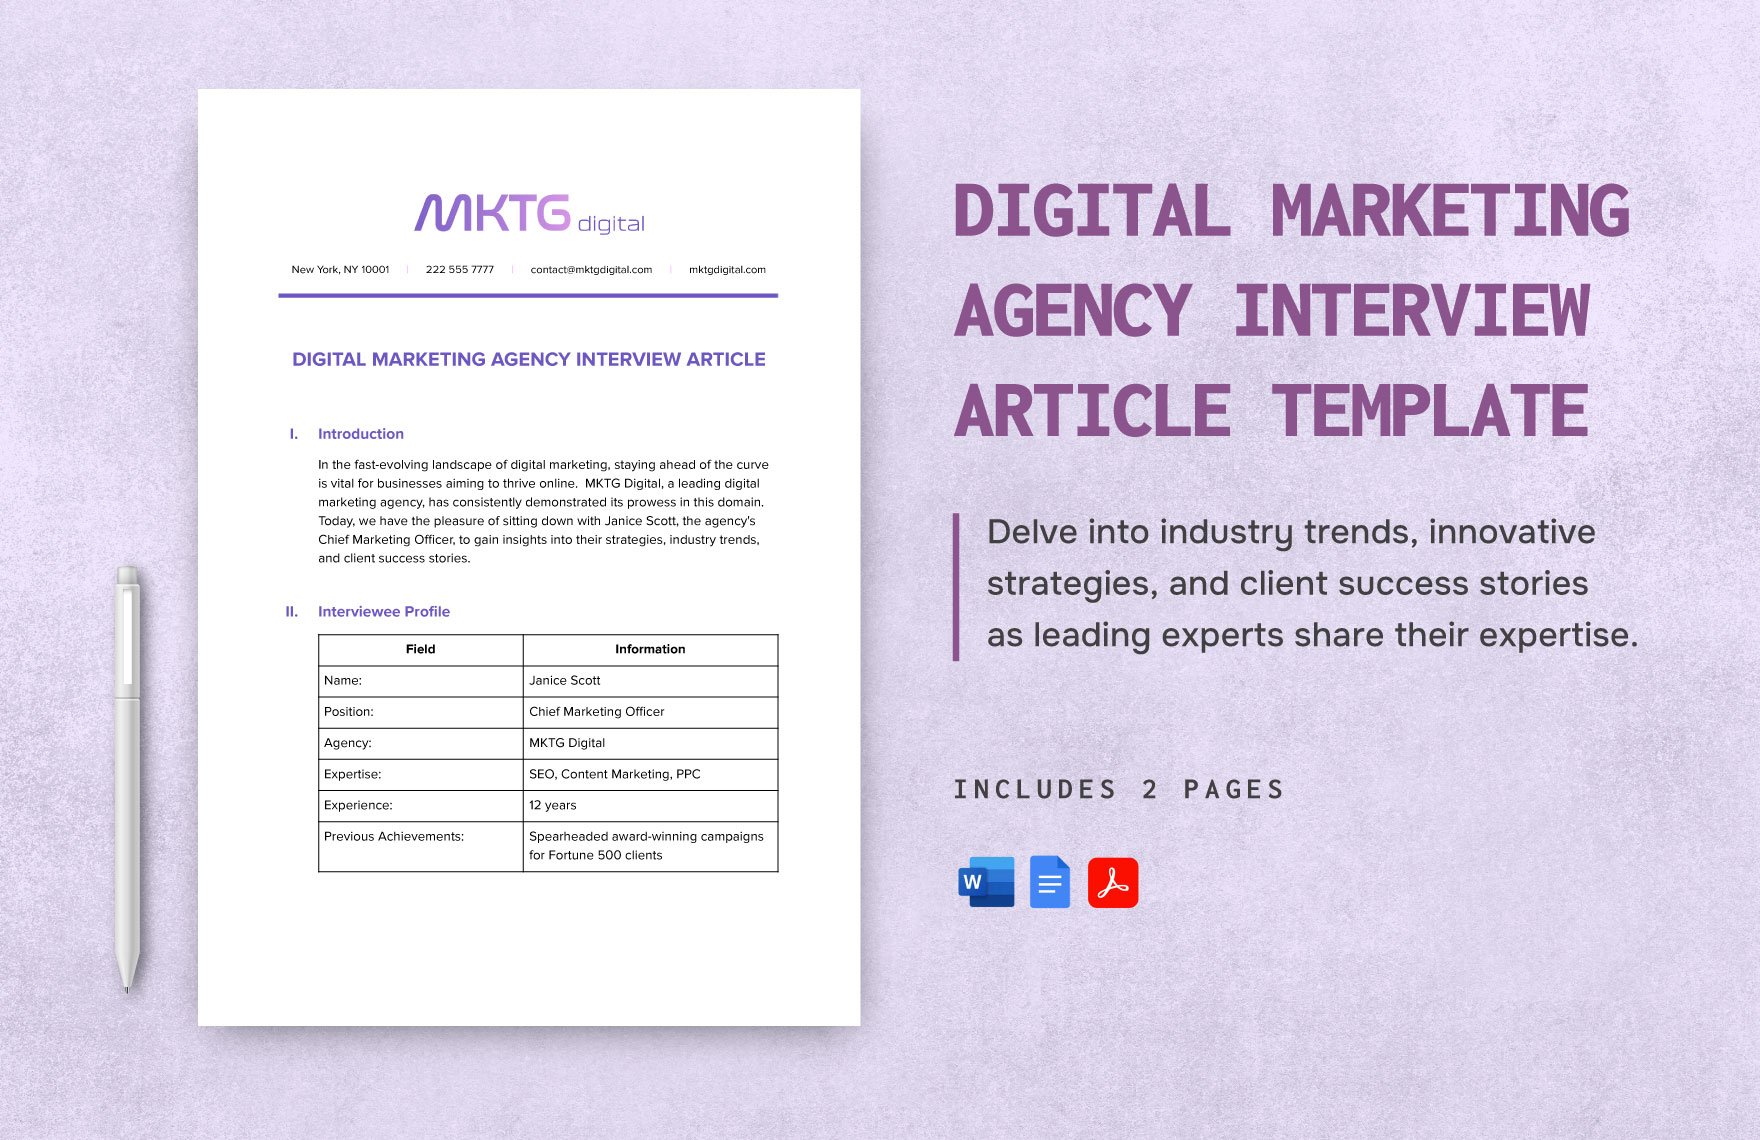 Digital Marketing Agency Interview Article Template in Word, Google Docs, PDF